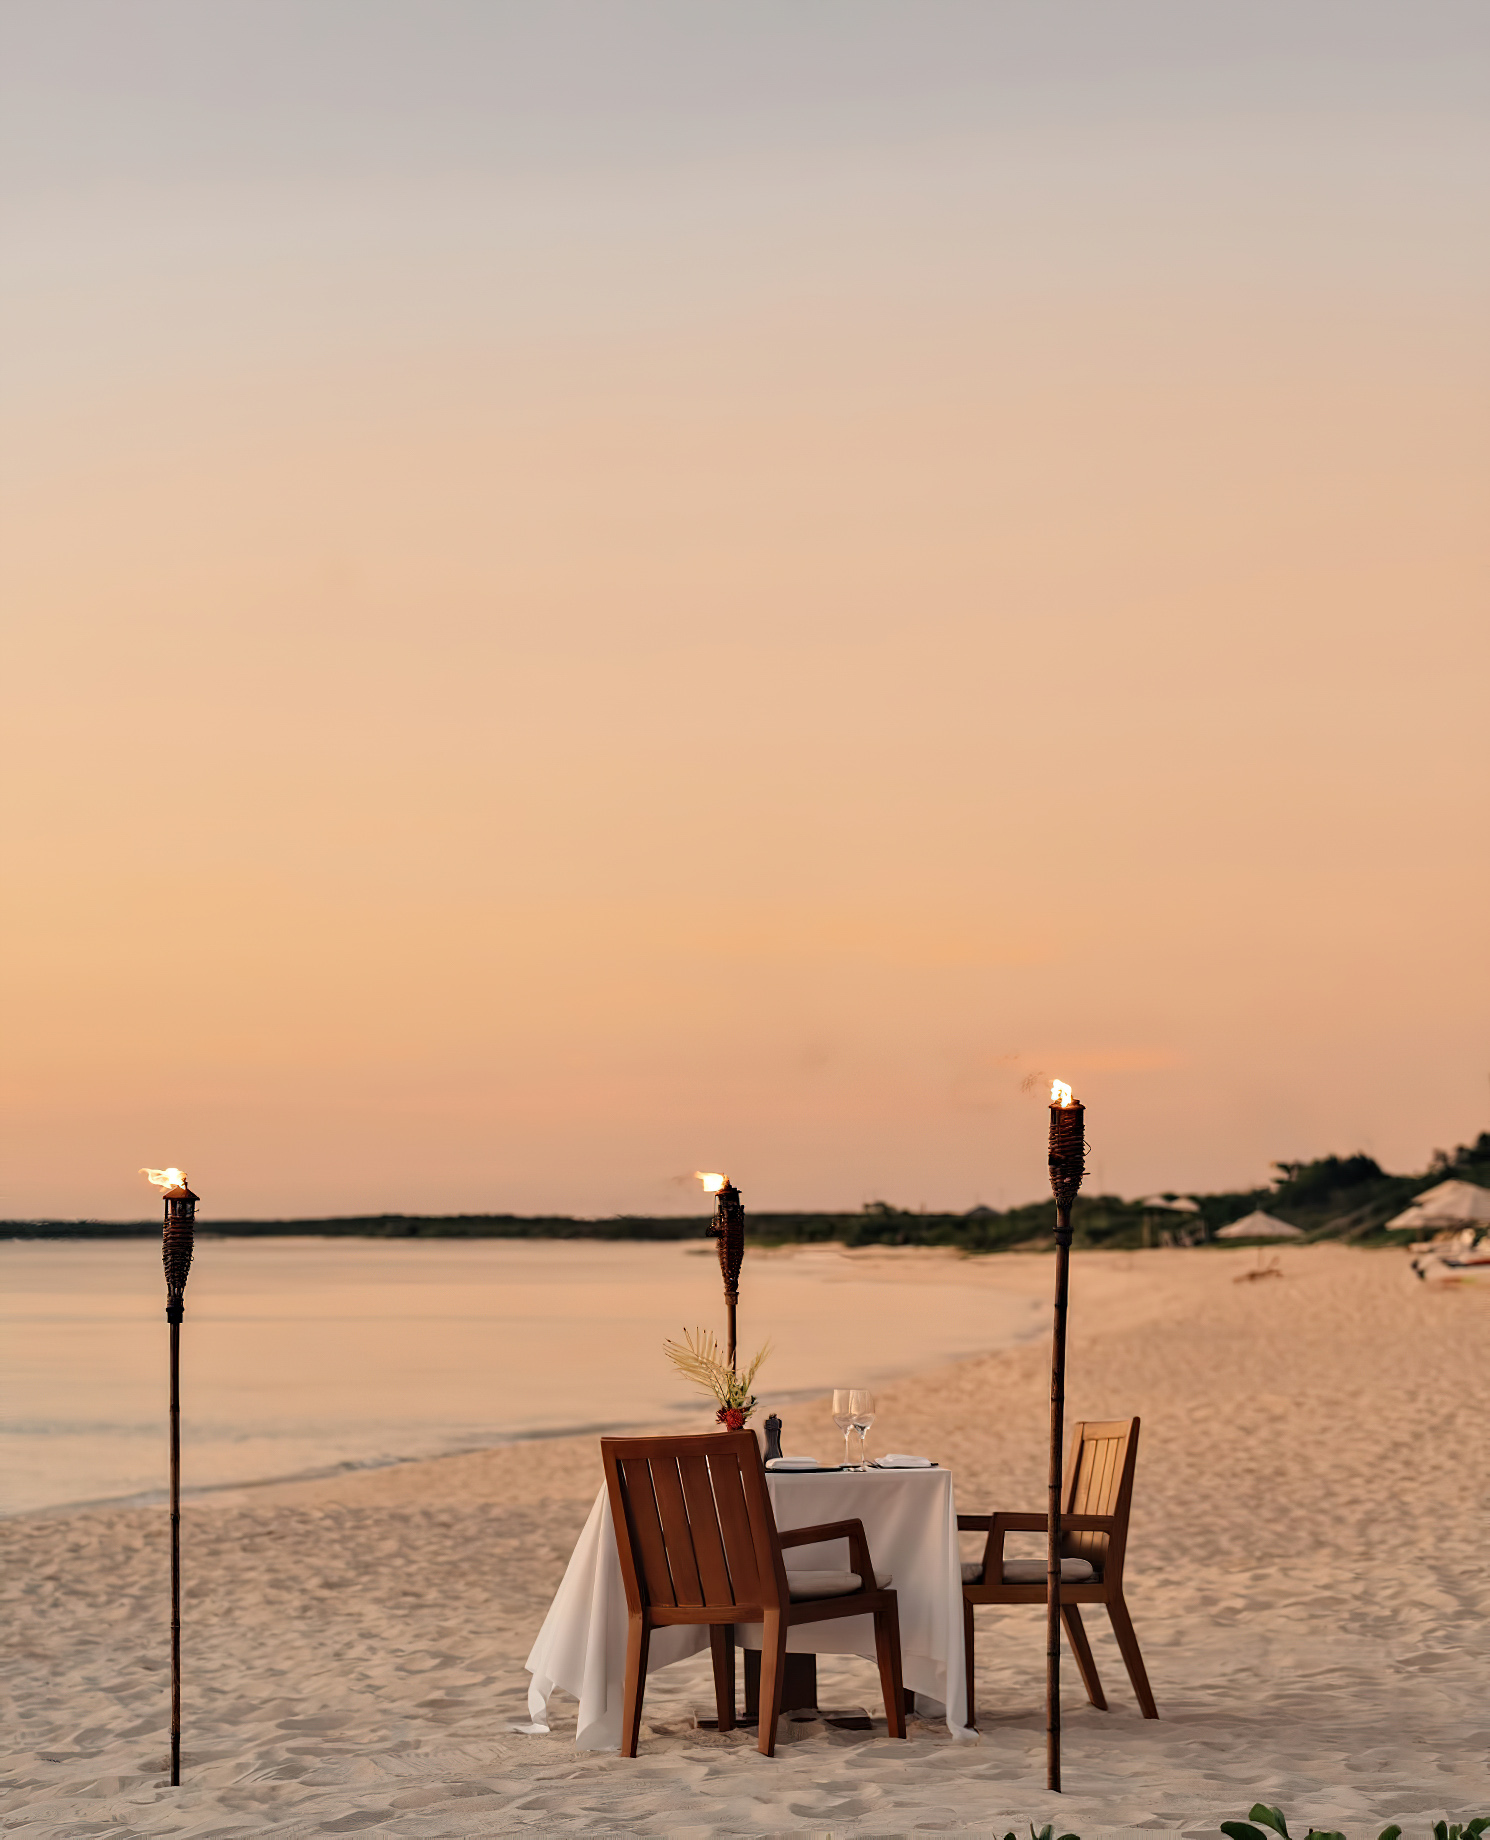 Amanyara Resort – Providenciales, Turks and Caicos Islands – Sunset Beach Dining Table